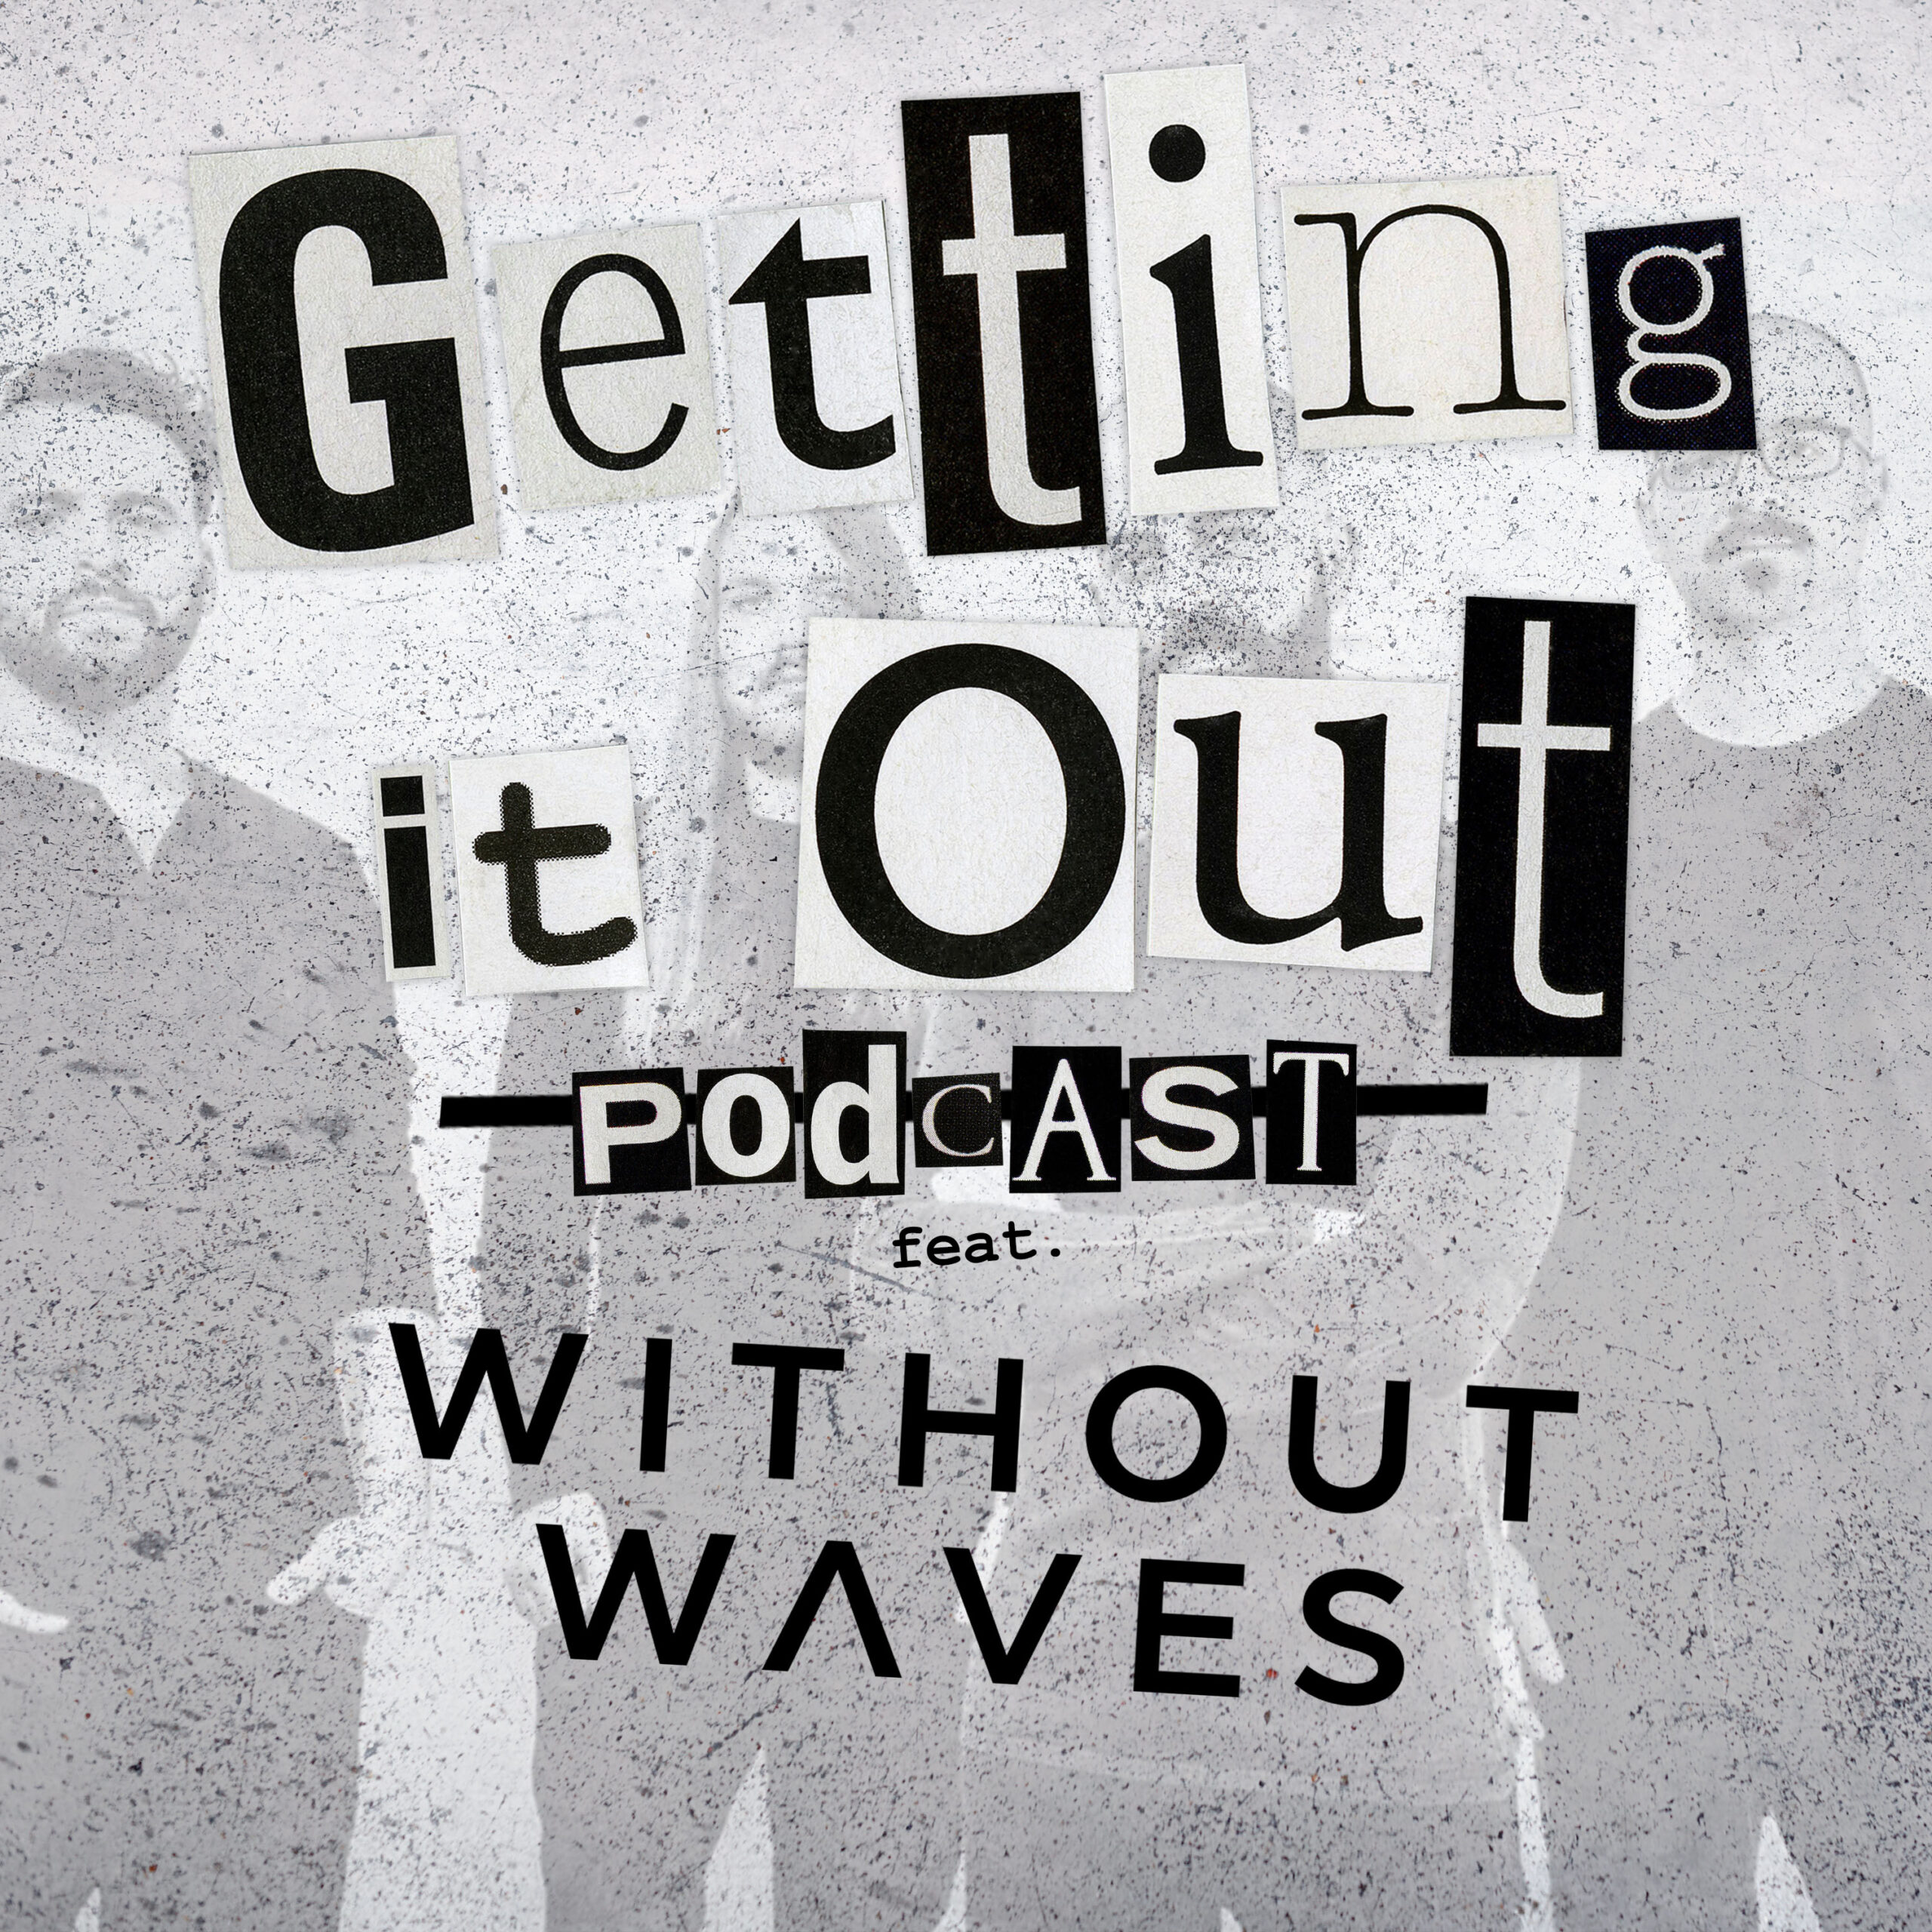 Episode 213 - Without Waves